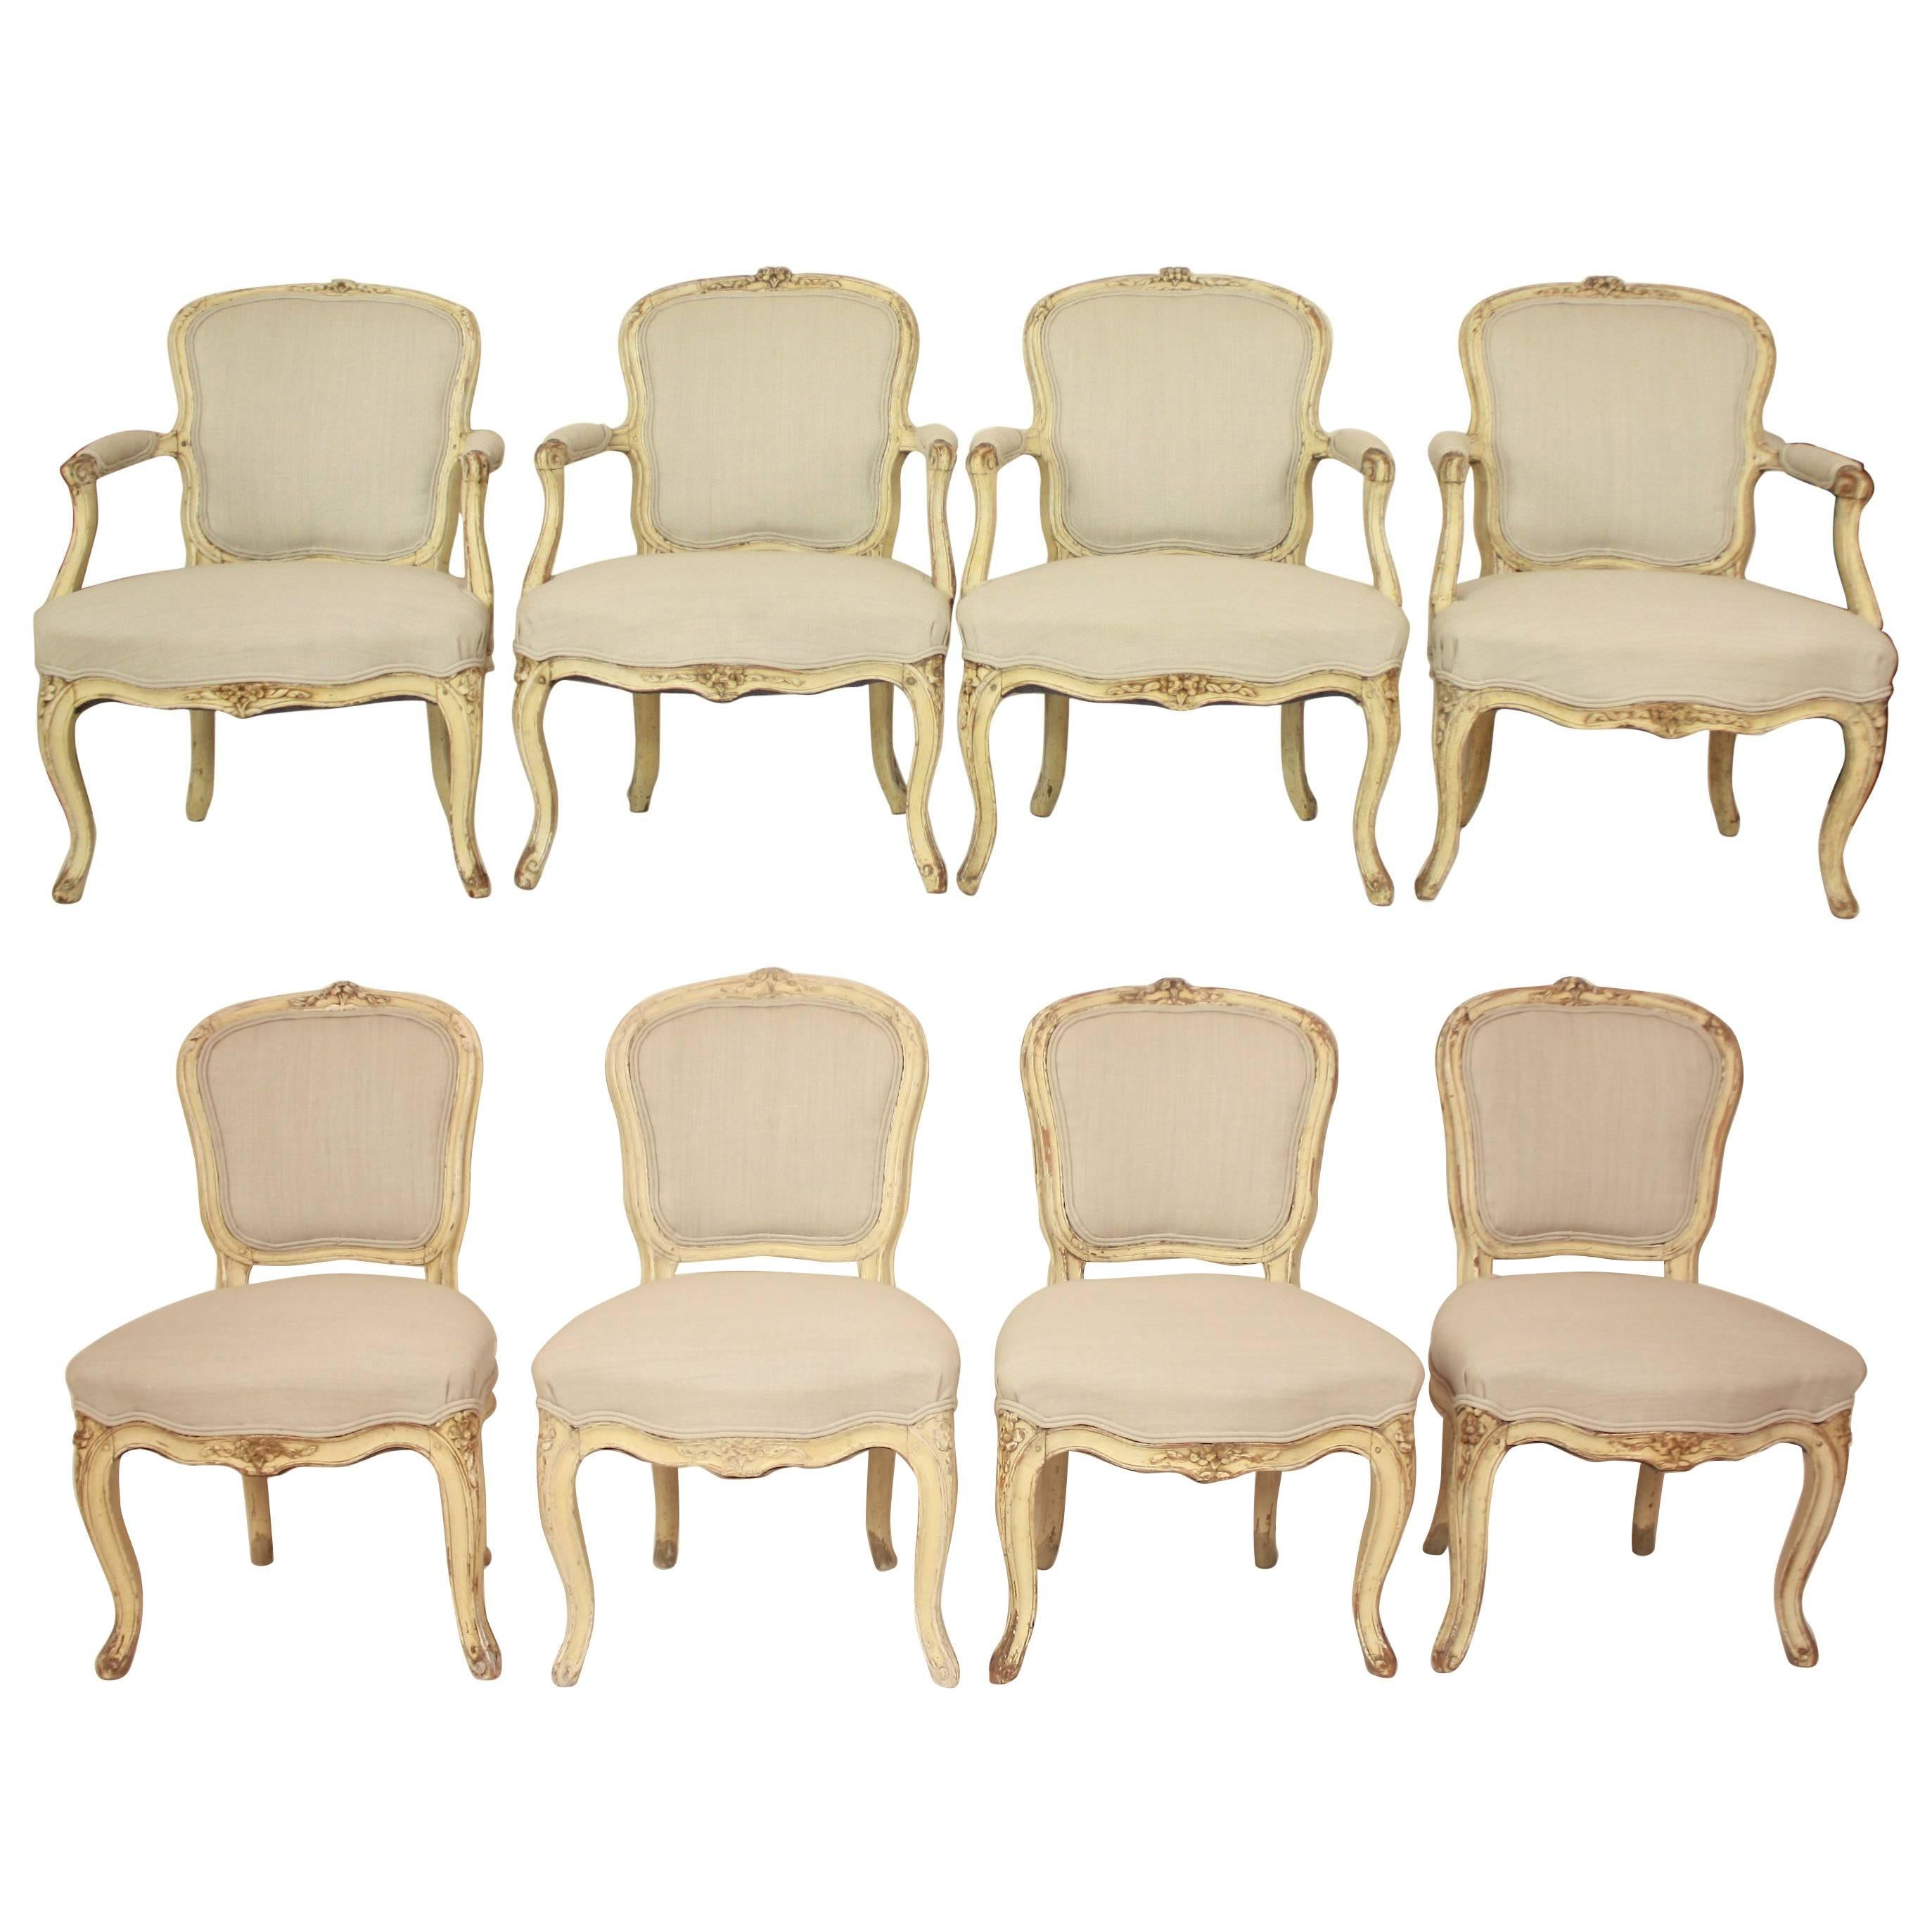 Rare Set of Eight  Louis XV Chairs Stamped J.B. Mouette, circa 1750